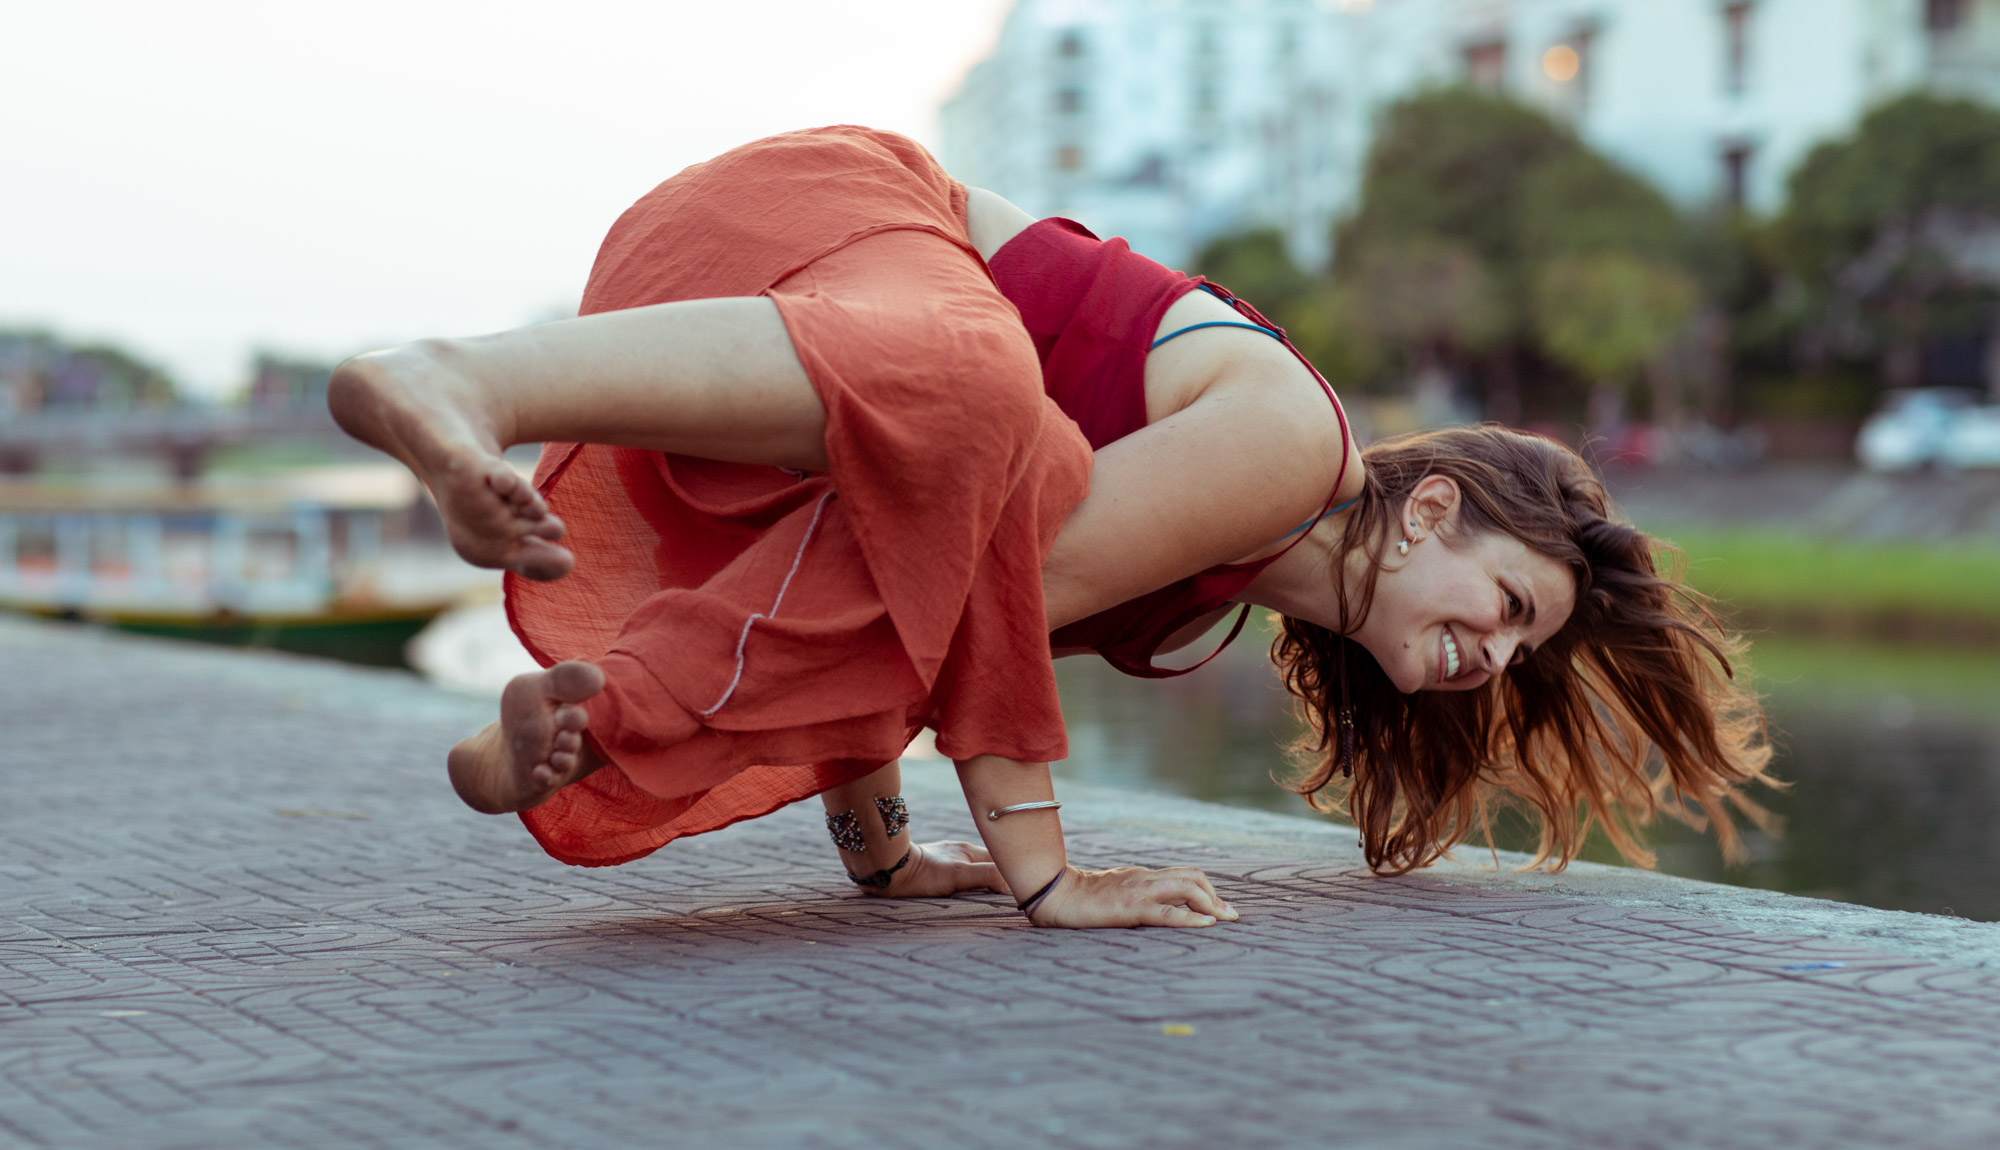 Woman laughs while attempting a yoga pose near a river